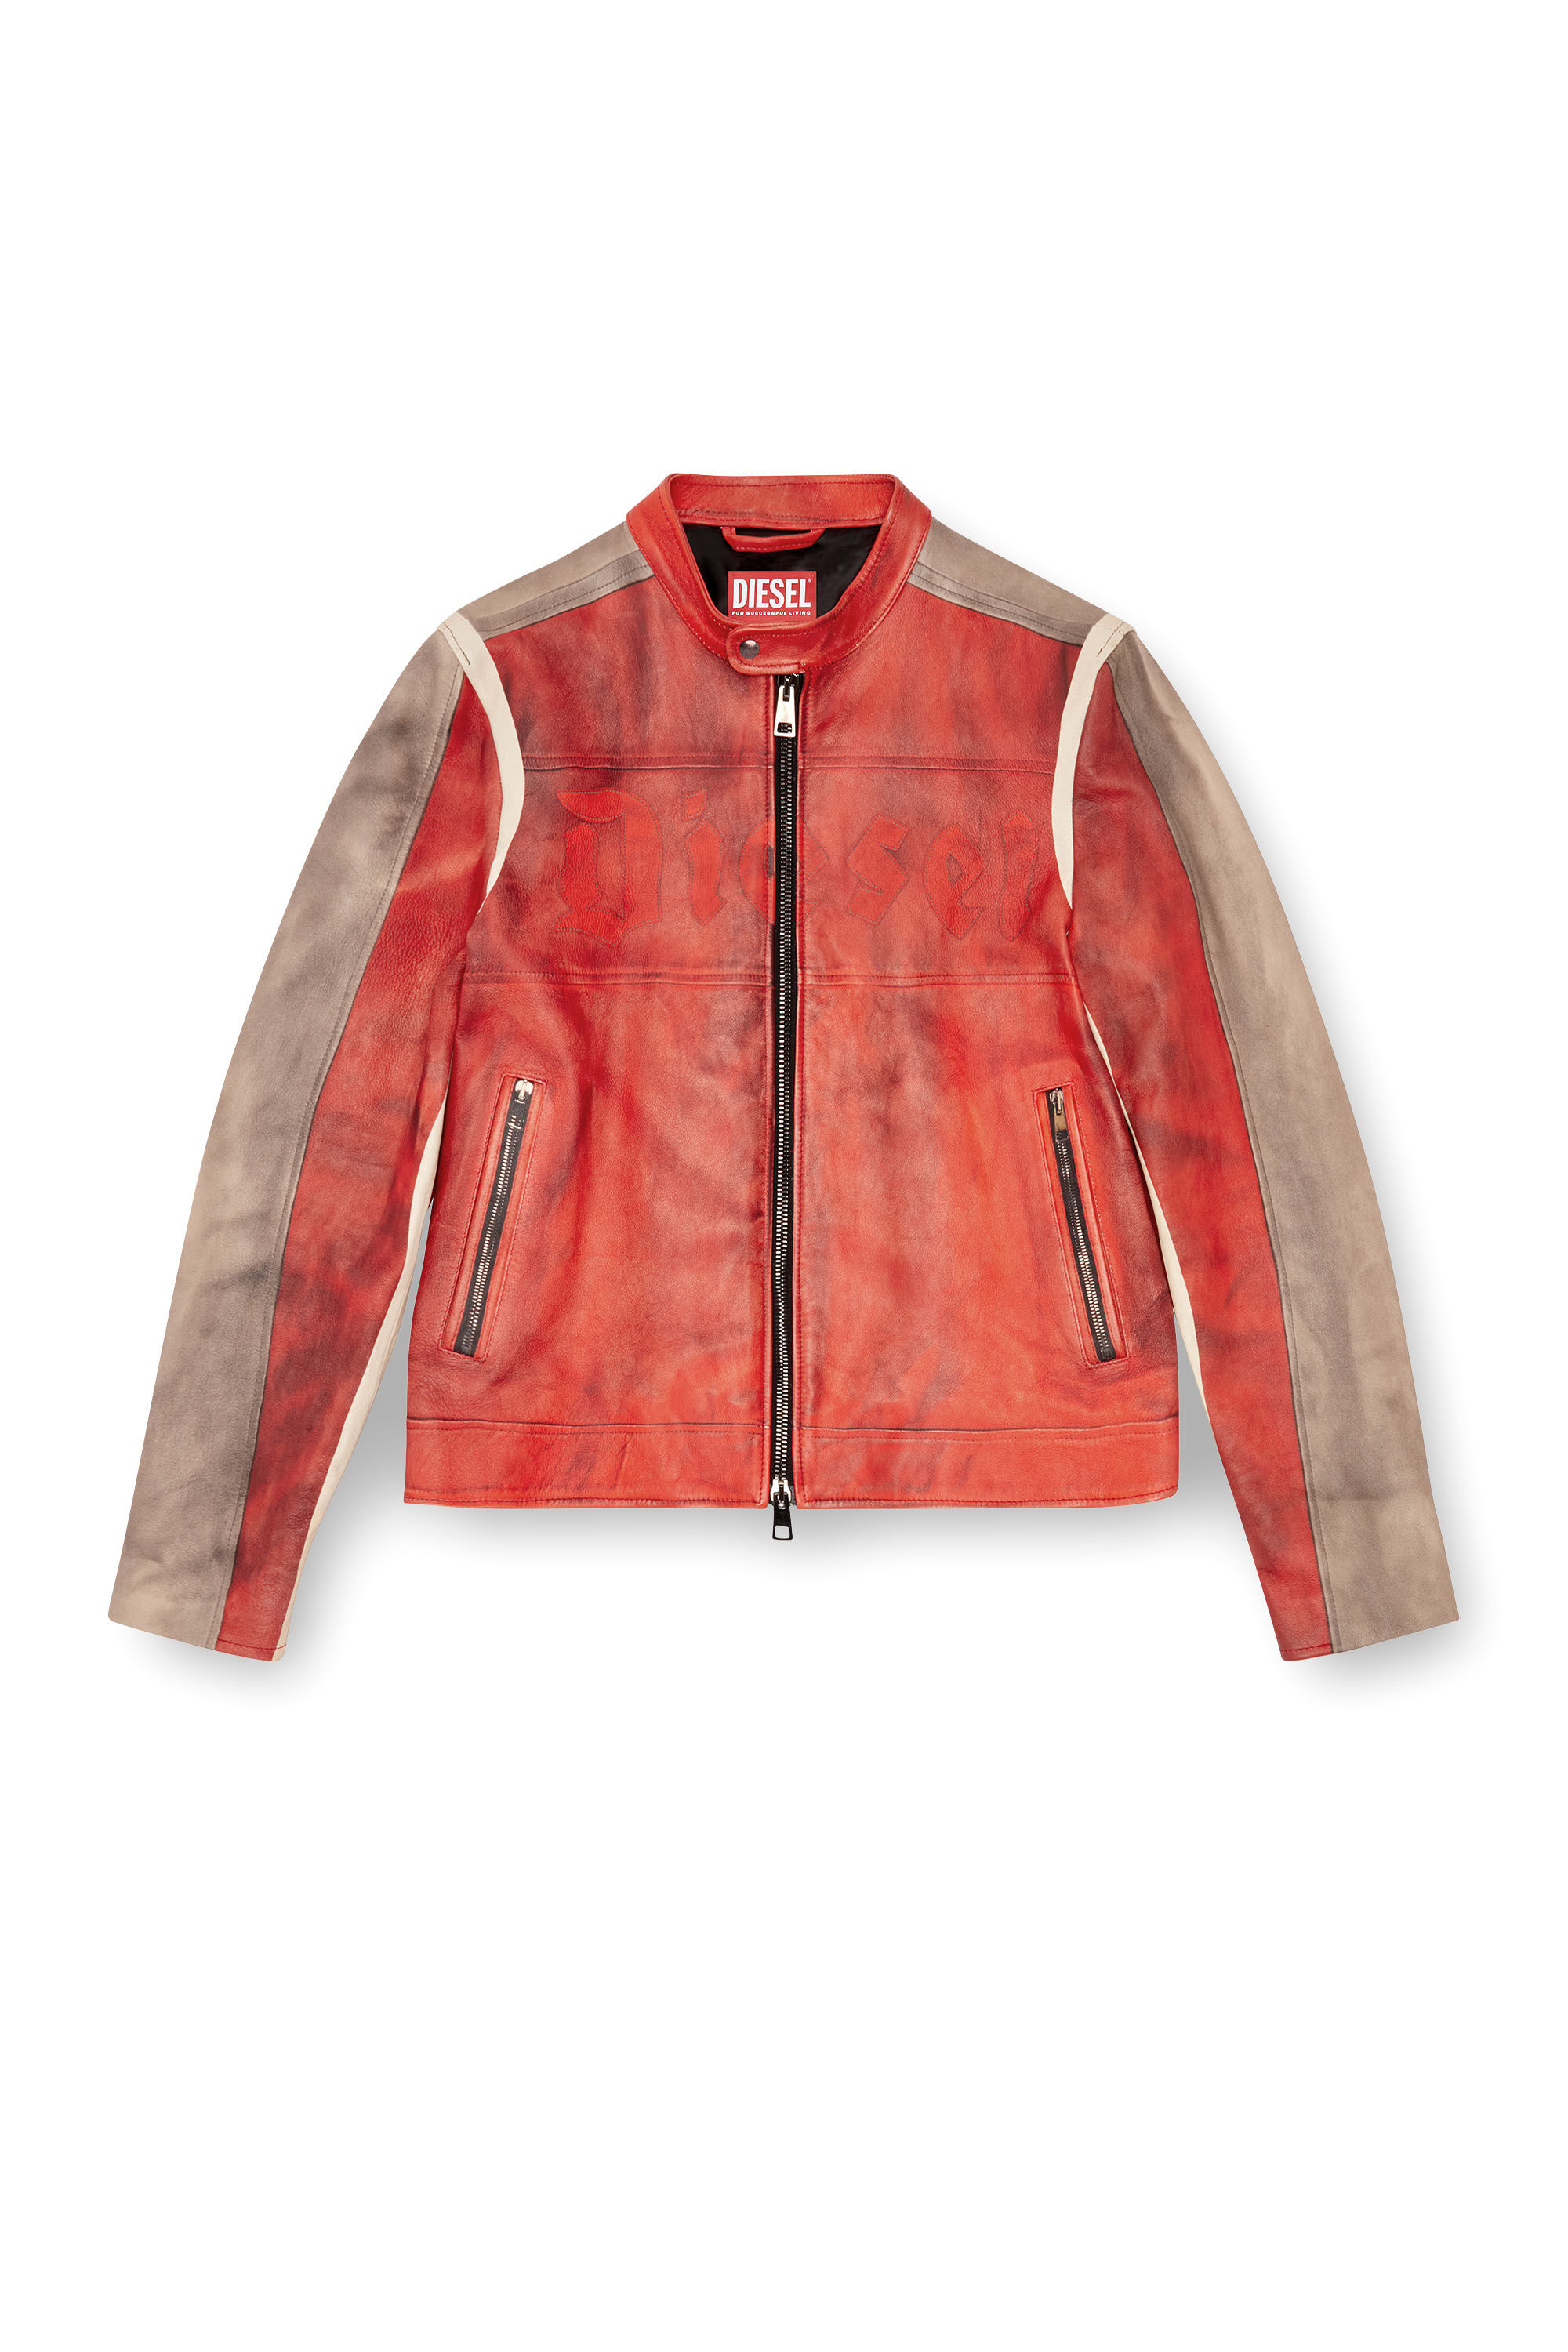 Diesel - L-RUSCHA, Uomo Giacca biker in pelle effetto dirty in Rosso - Image 2